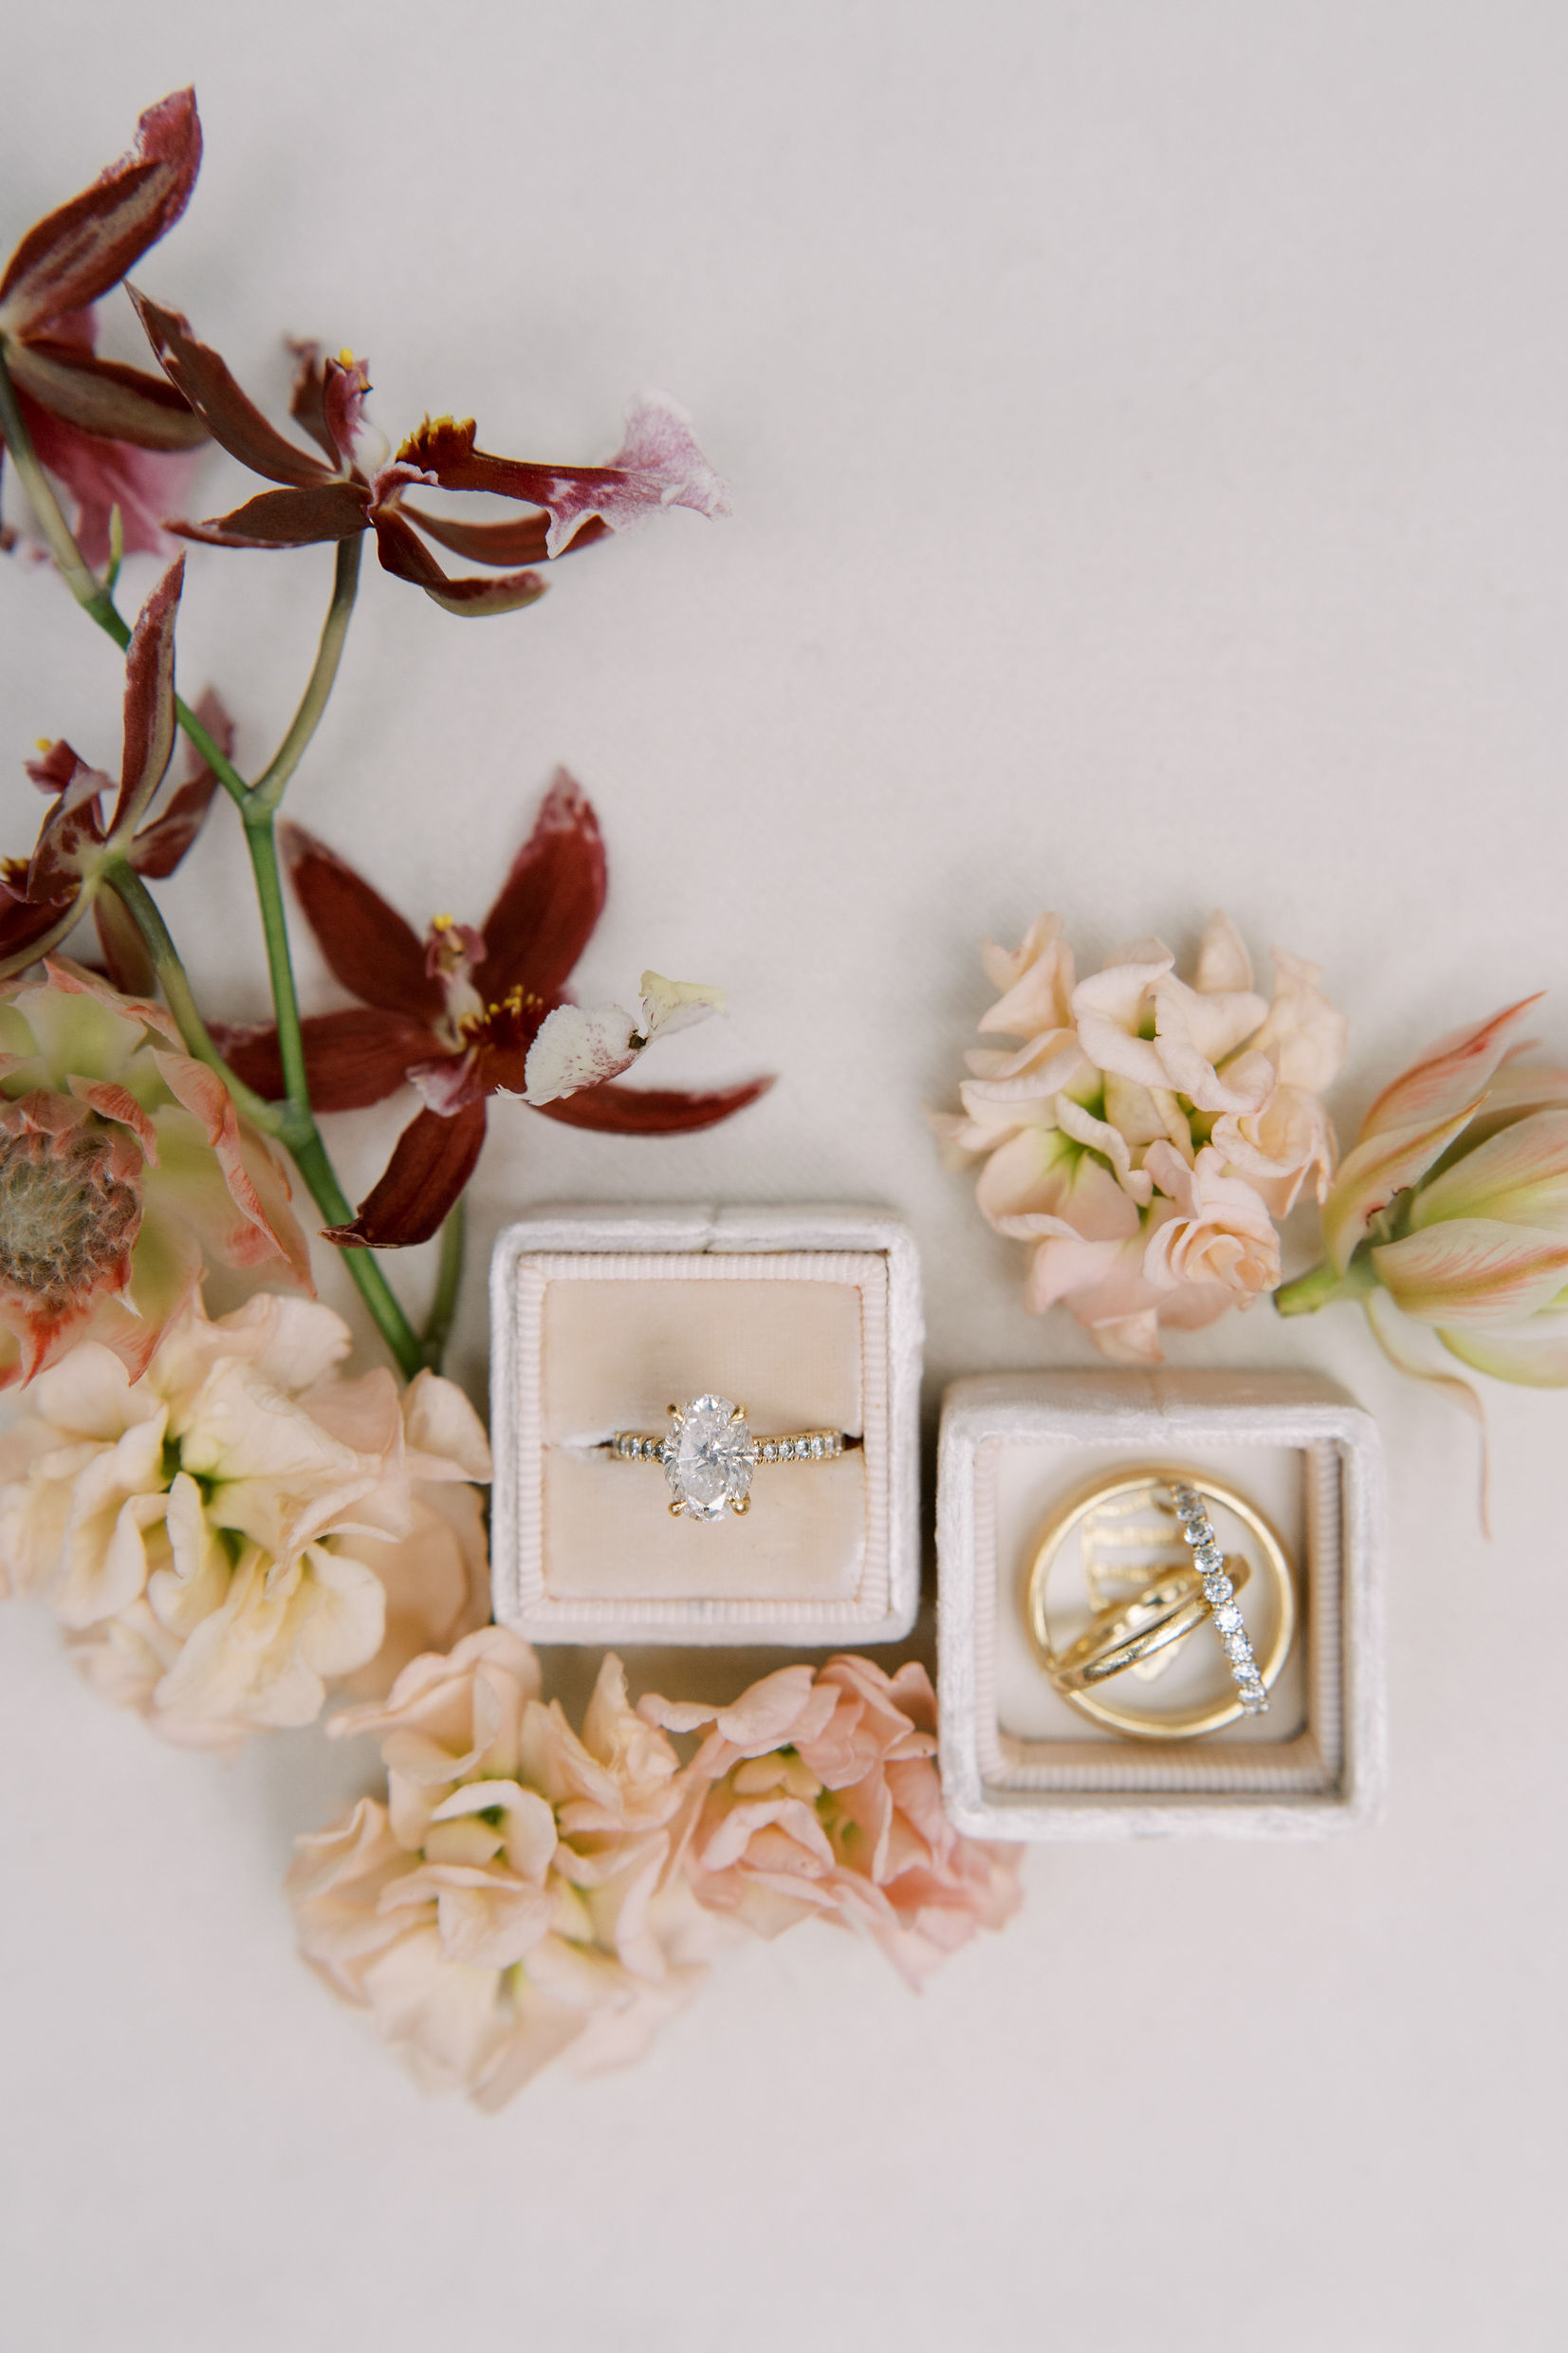 A group of flowers and two ring boxes